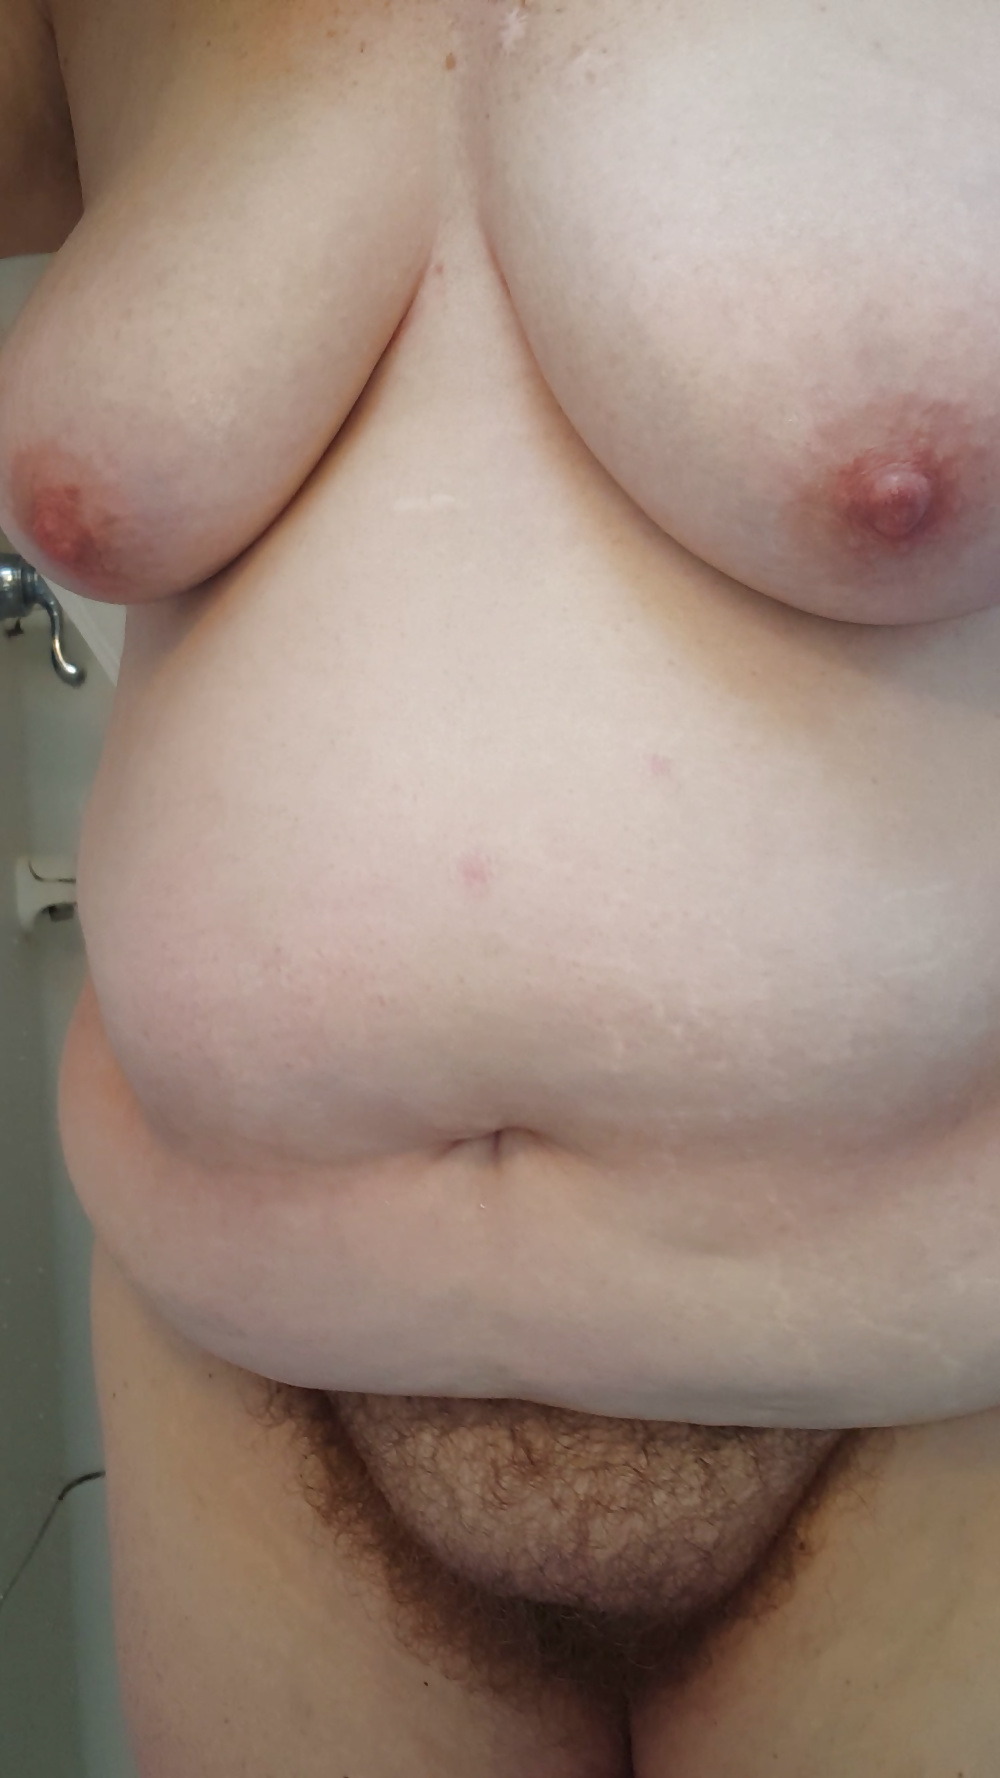 My Wifes Hairy Pussy Big Tits Nipples And Bbw Body 23